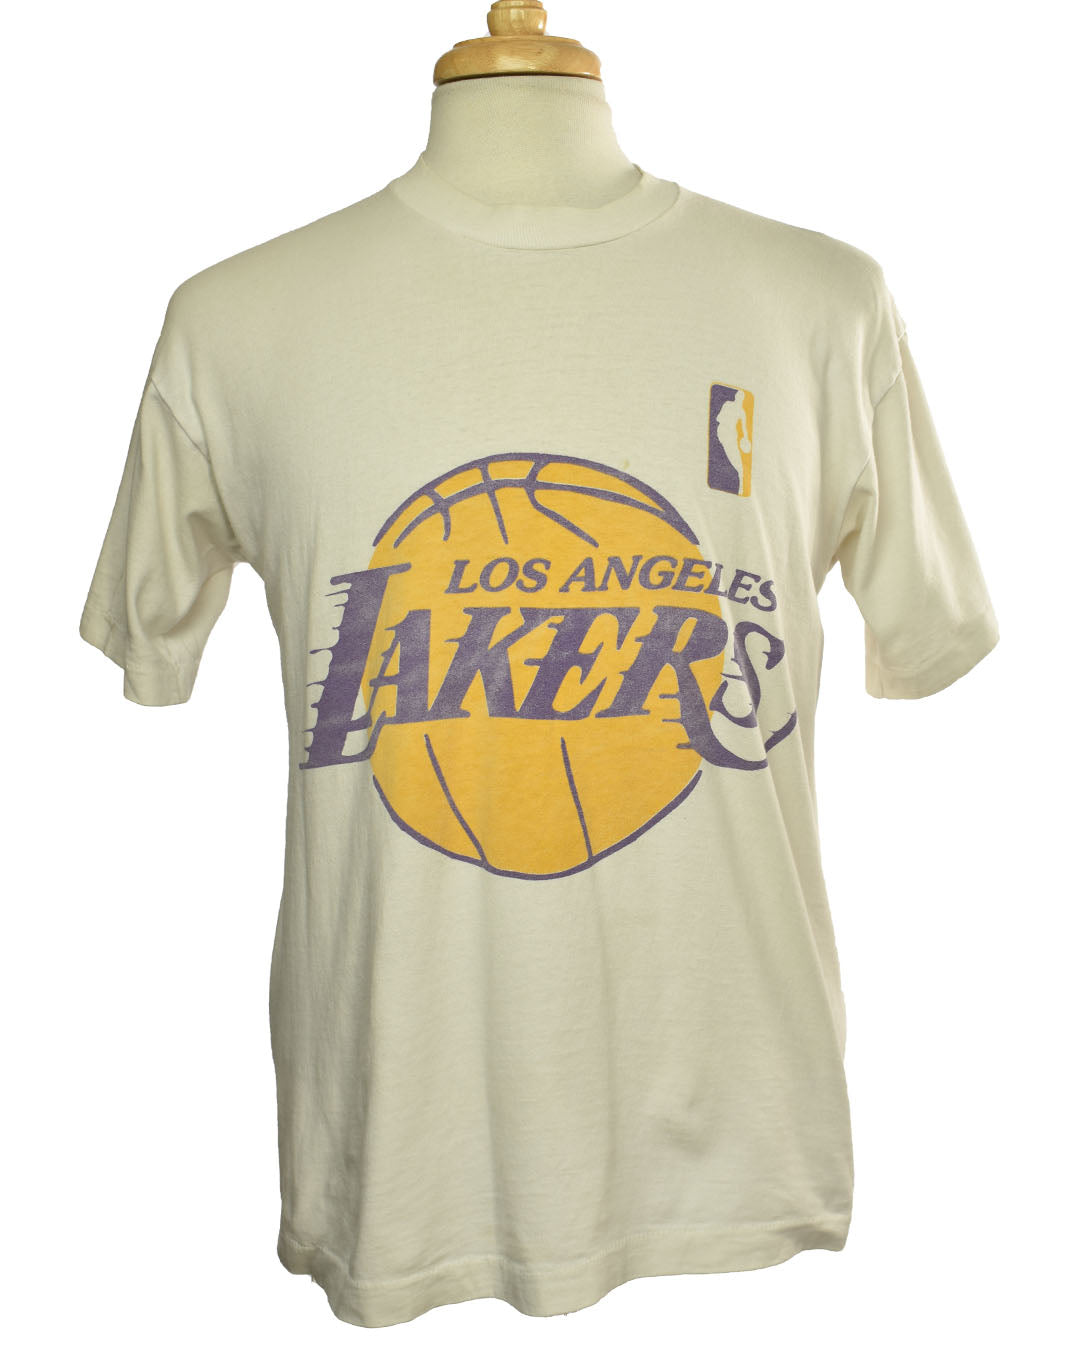 Vintage Los Angeles Lakers Kobe Bryant Single Stitch T-shirt Made in USA Size L